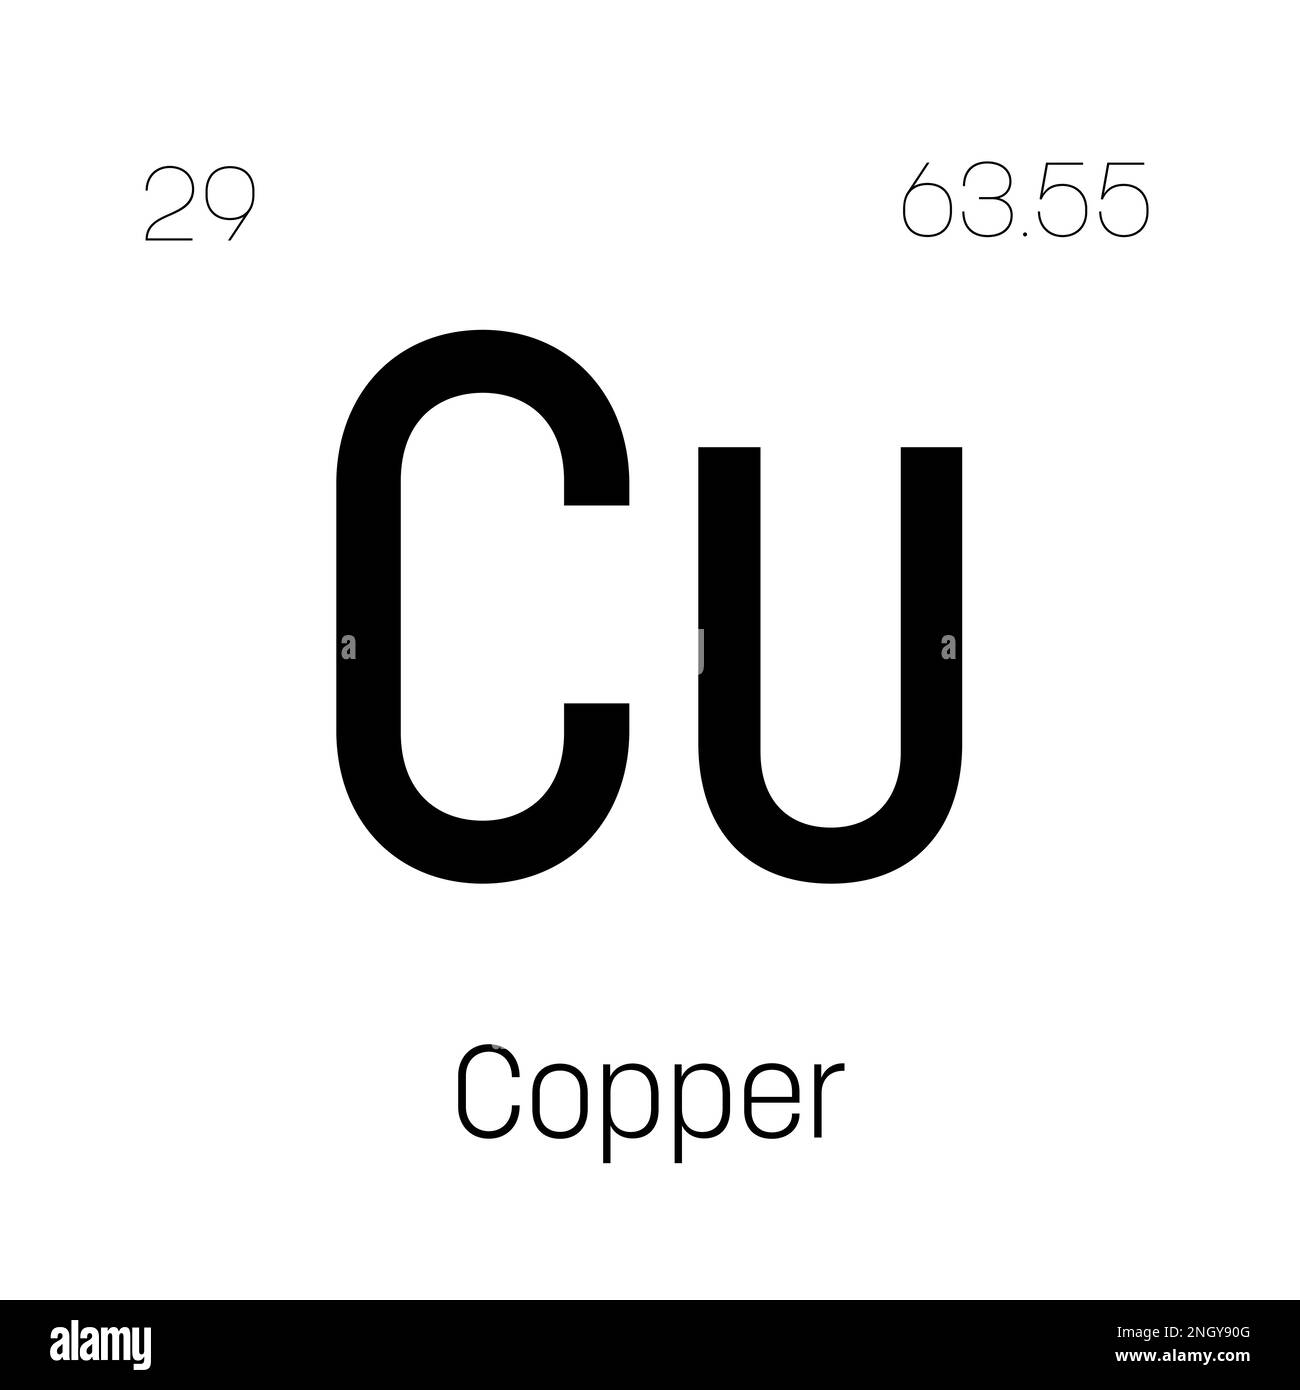 Cobalt, Co, periodic table element with name, symbol, atomic number and weight. Transition metal with various industrial uses, such as in magnets, batteries, and as a catalyst in chemical reactions. Stock Vector